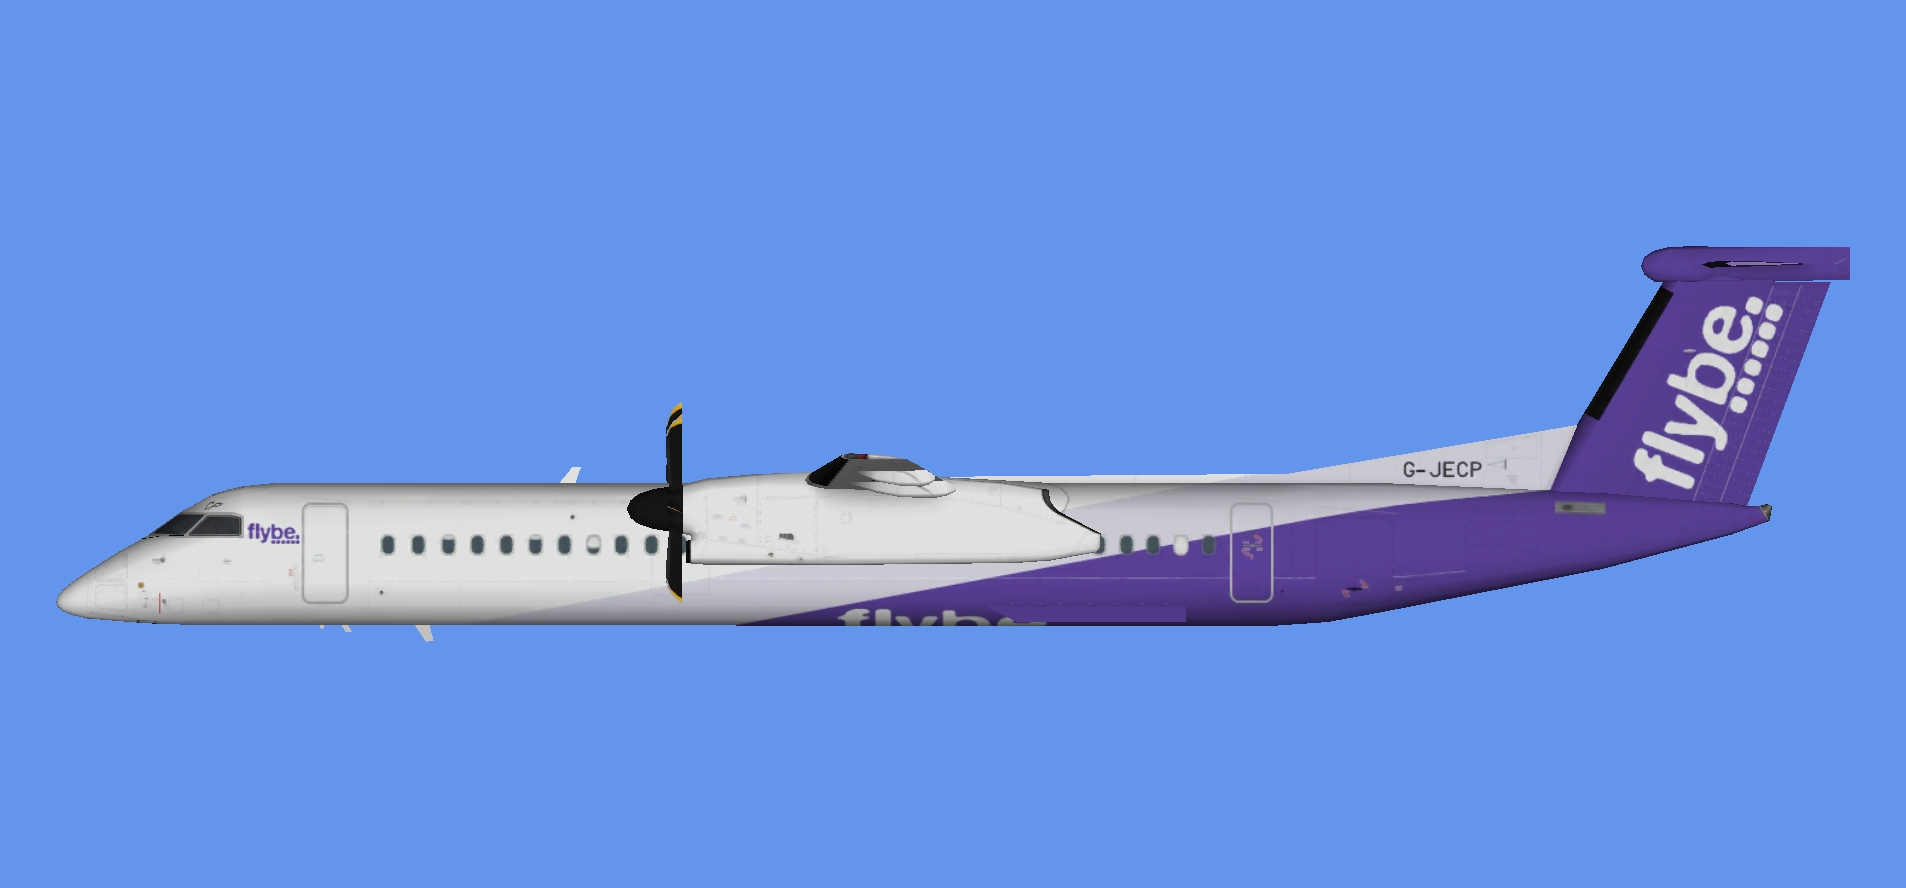 Flybe Dash 8-400 NC 2018